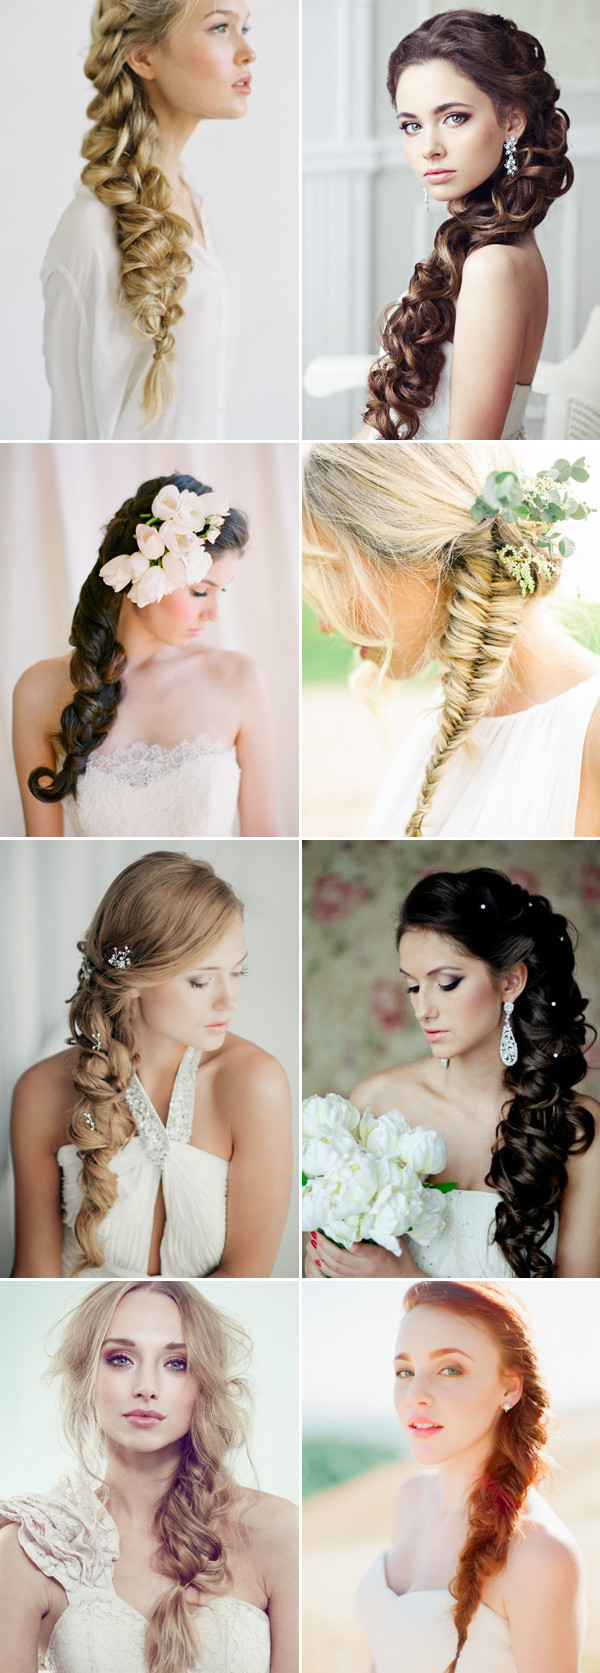 Wedding Hairstyles With Braids For Long Hair
 42 Steal Worthy Wedding Hairstyles for Long Hair